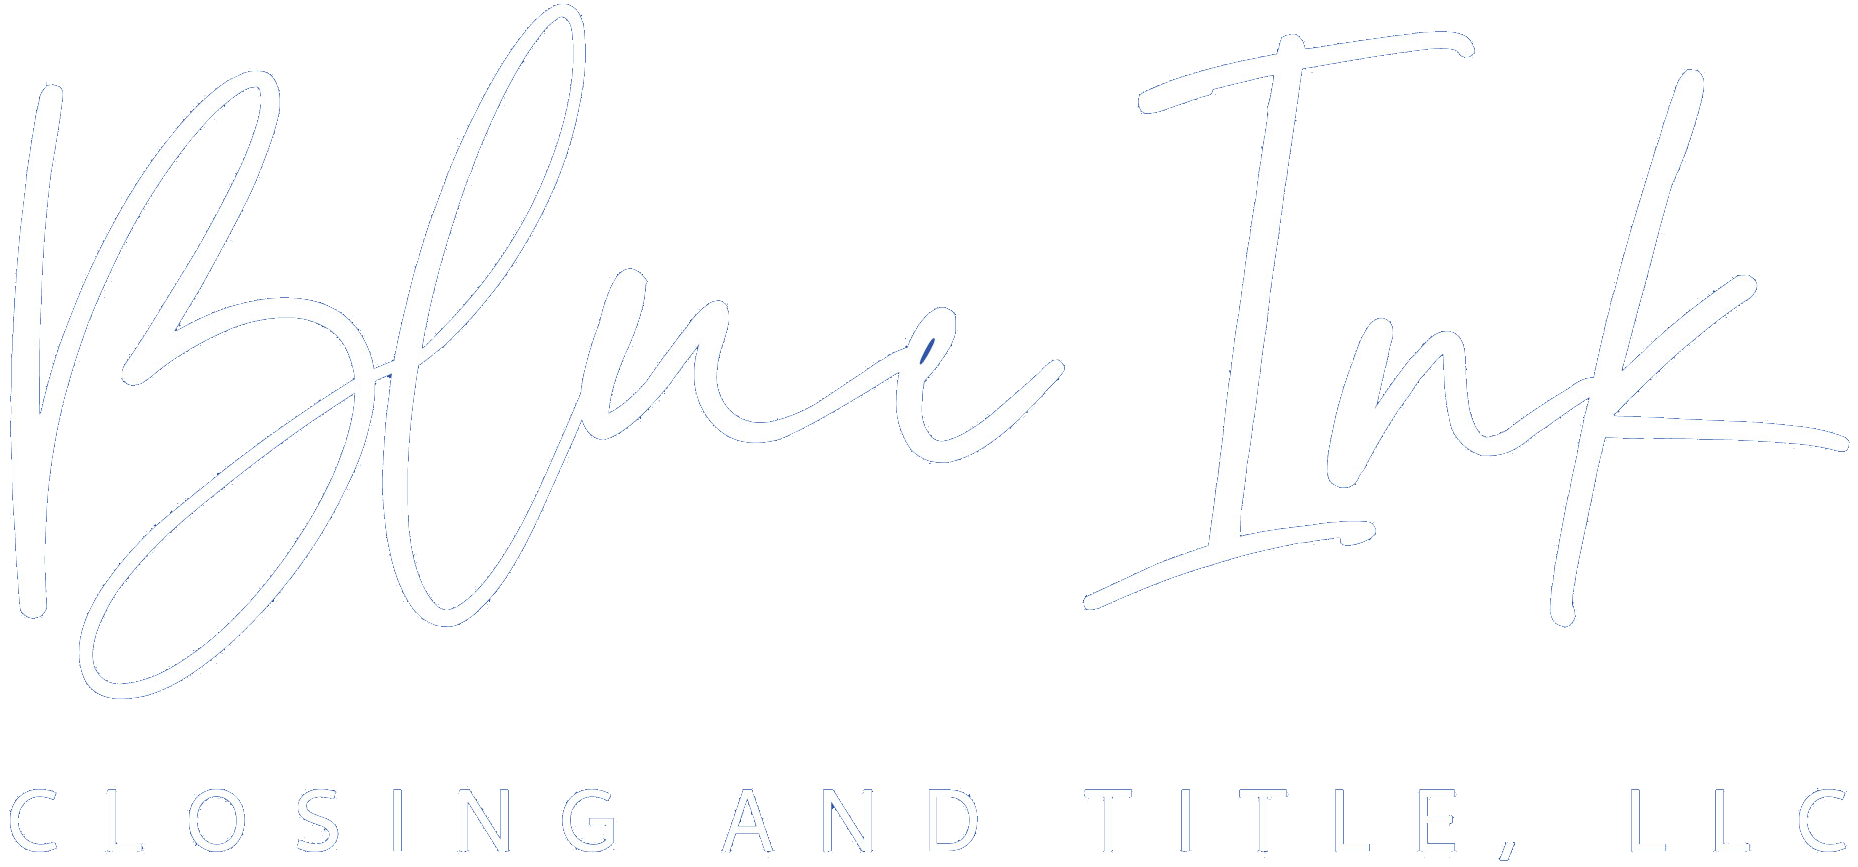 Blue Ink Closing and Title, LLC